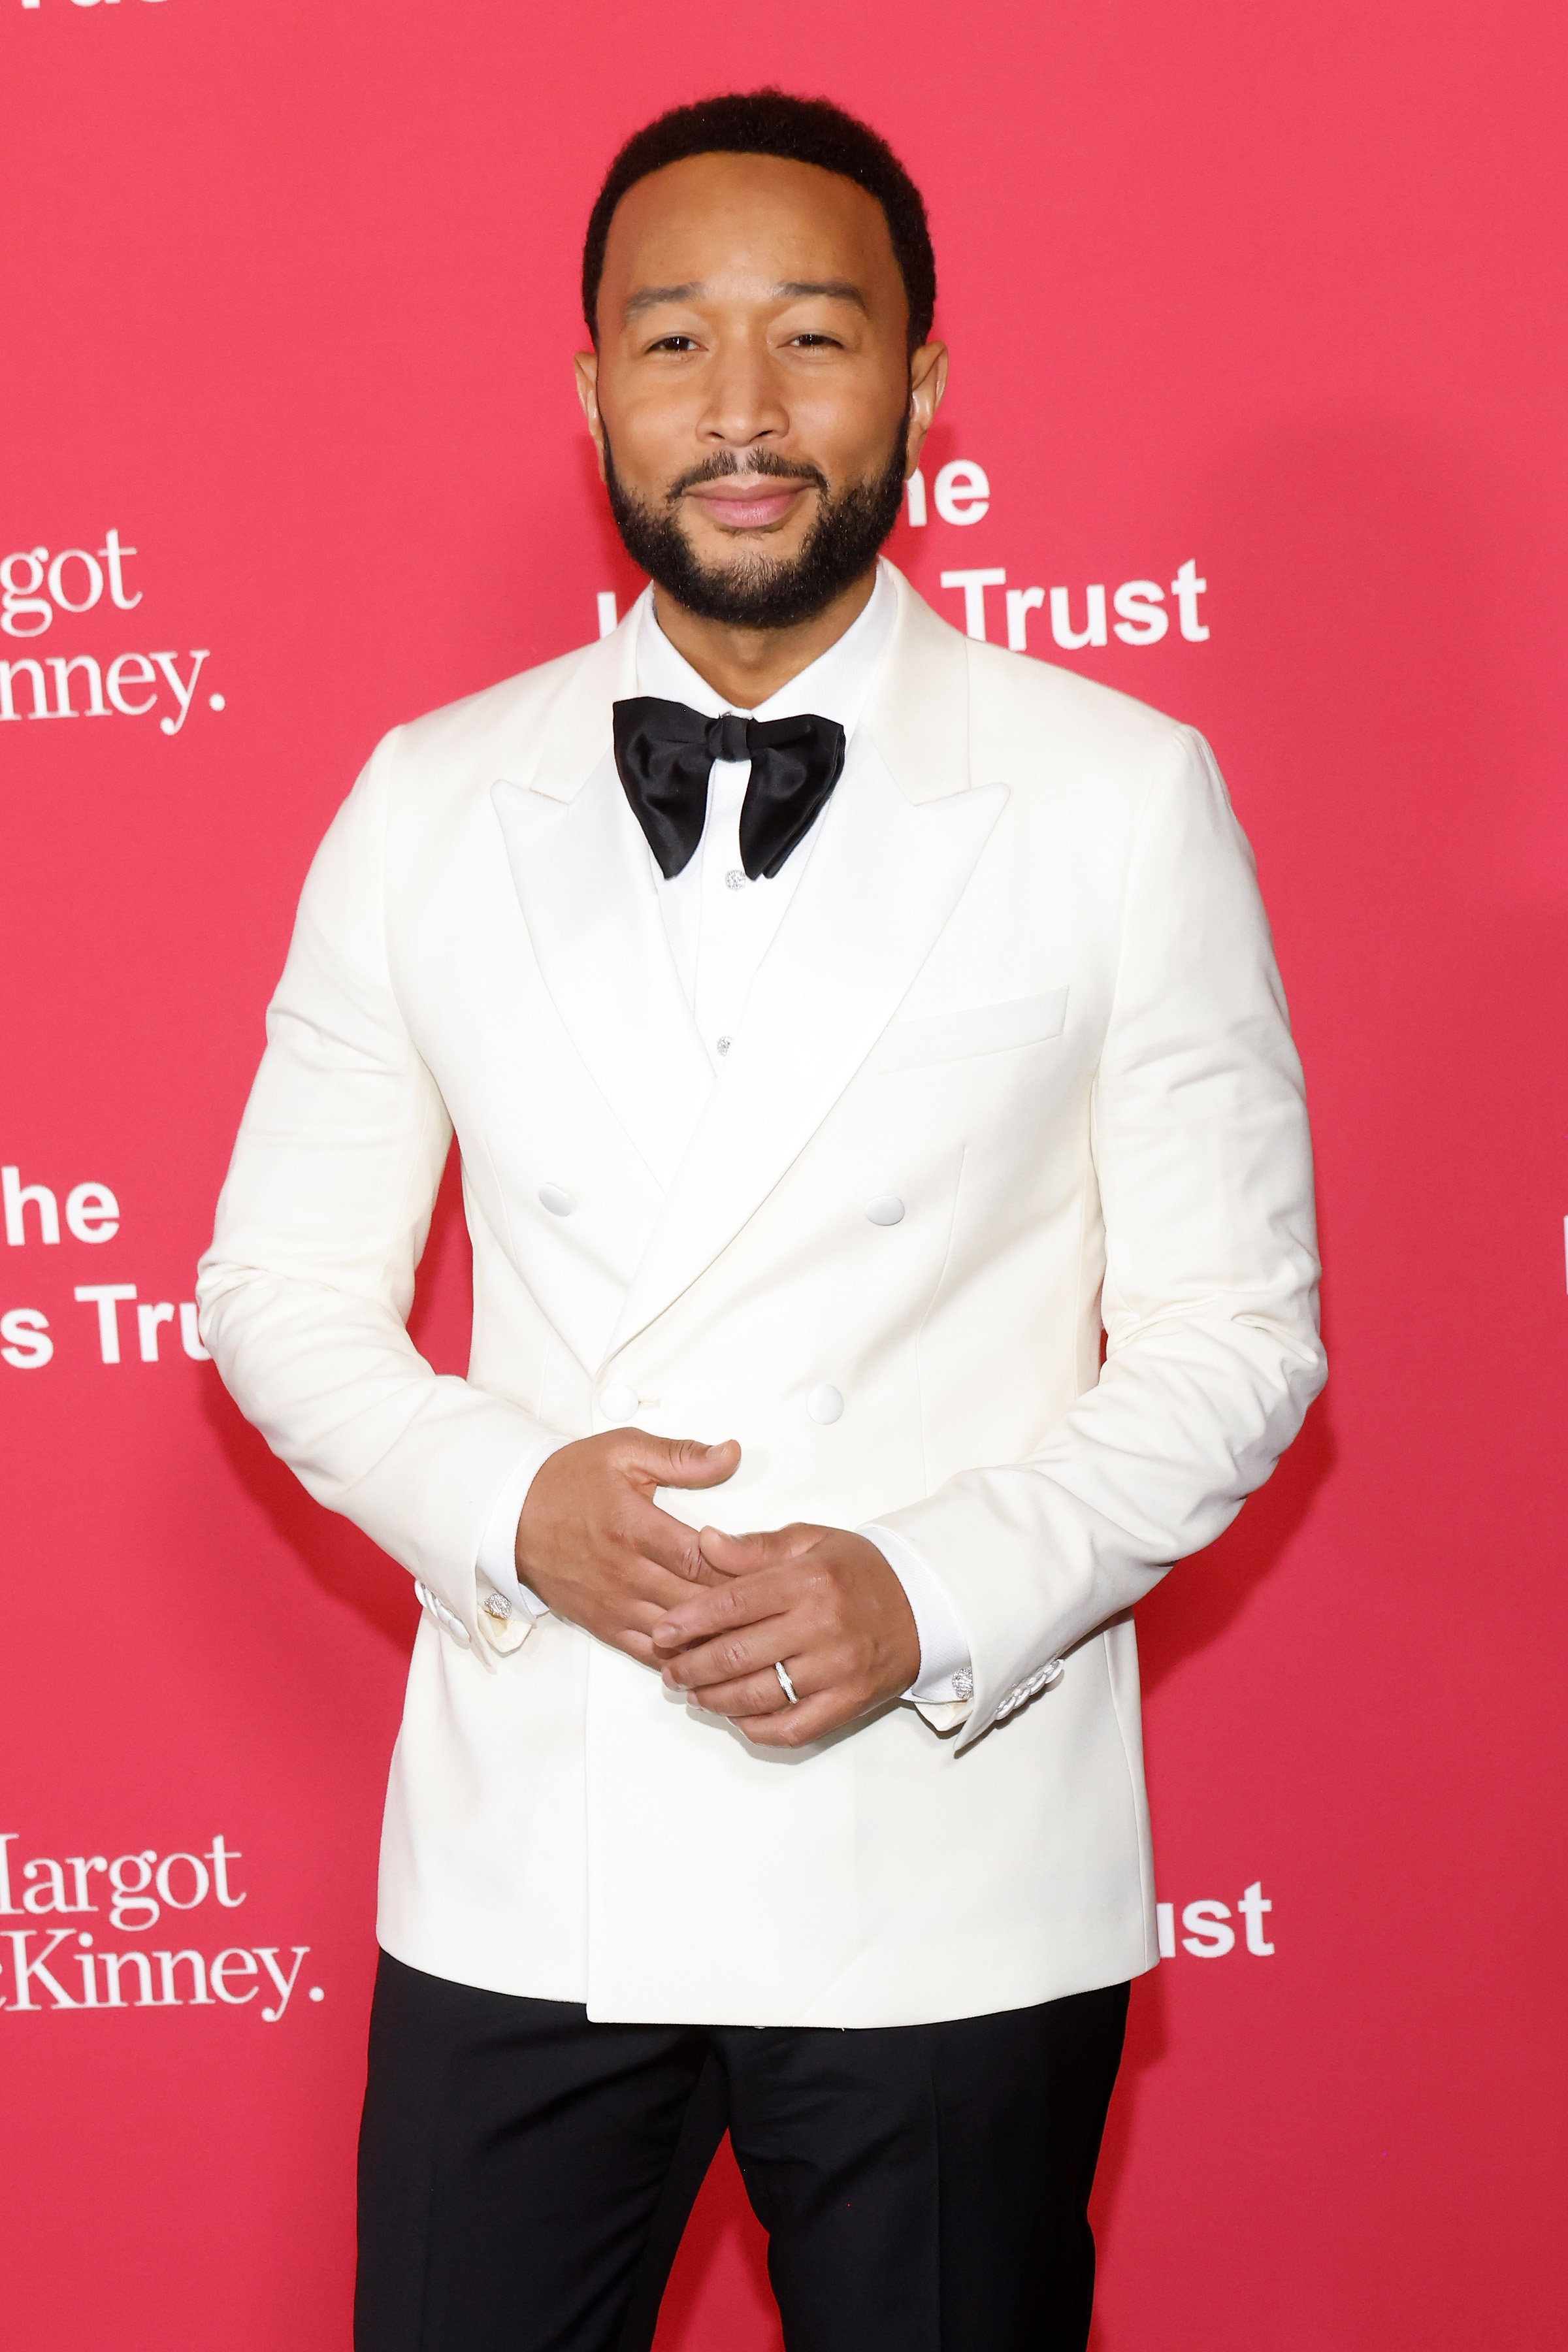 John Legend in a white tuxedo with black lapels, posing at an event